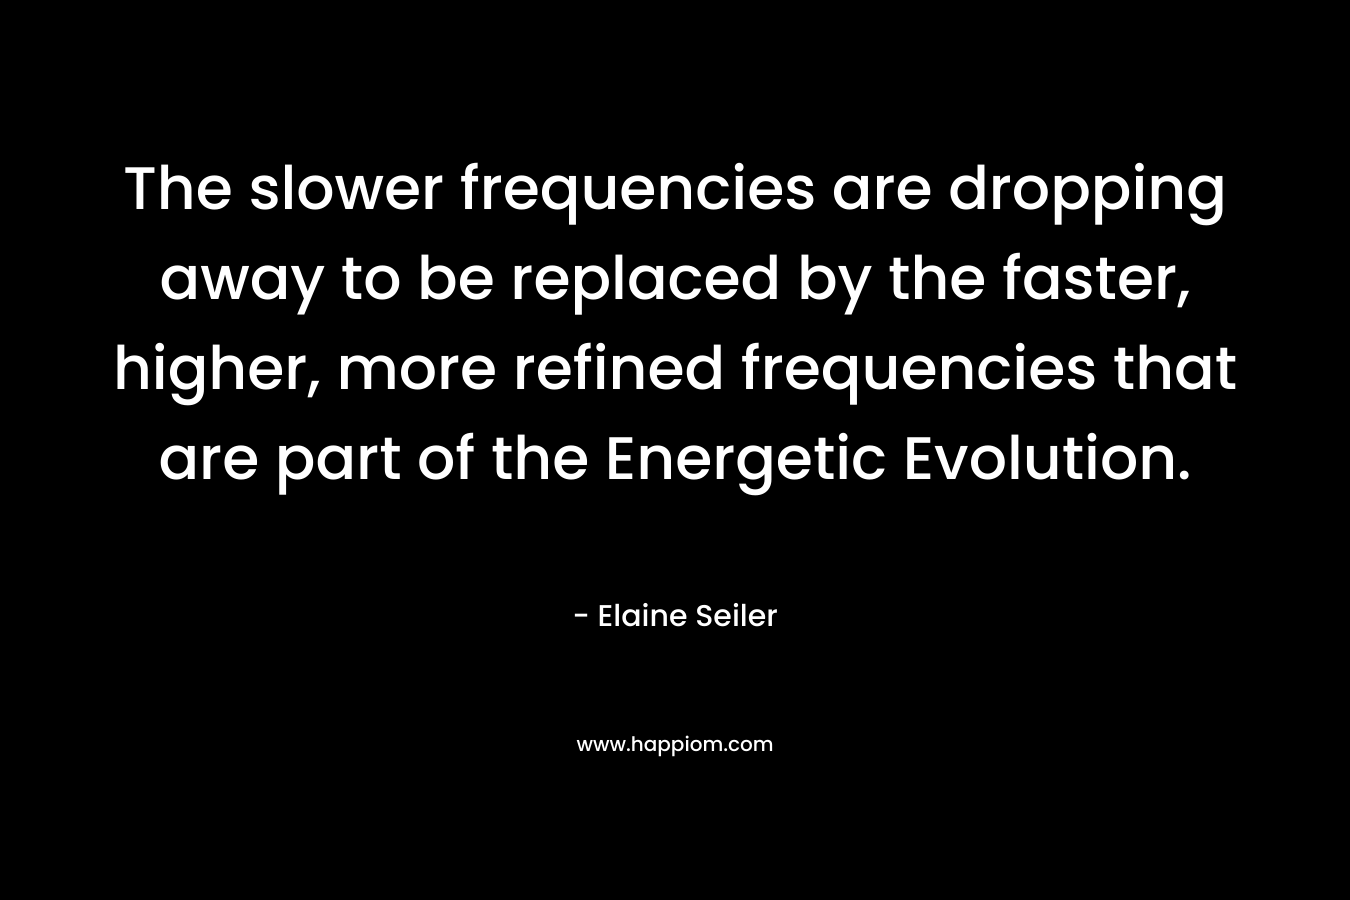 The slower frequencies are dropping away to be replaced by the faster, higher, more refined frequencies that are part of the Energetic Evolution. – Elaine Seiler